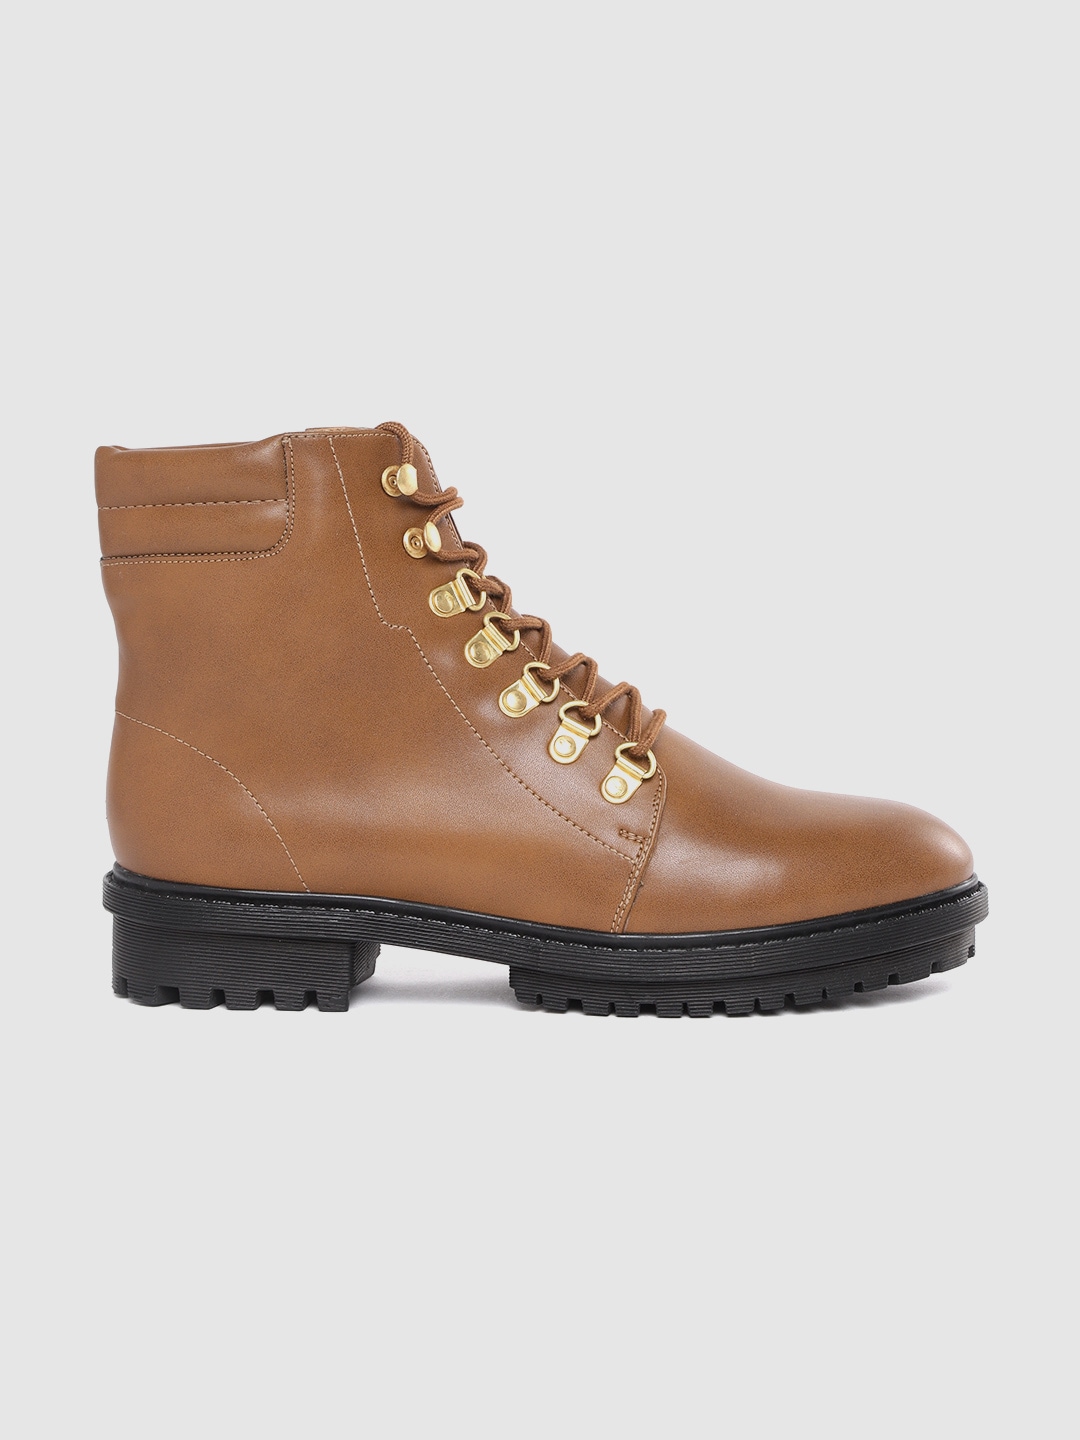 Roadster Women Tan Brown Solid Mid-Top Flat Boots Price in India